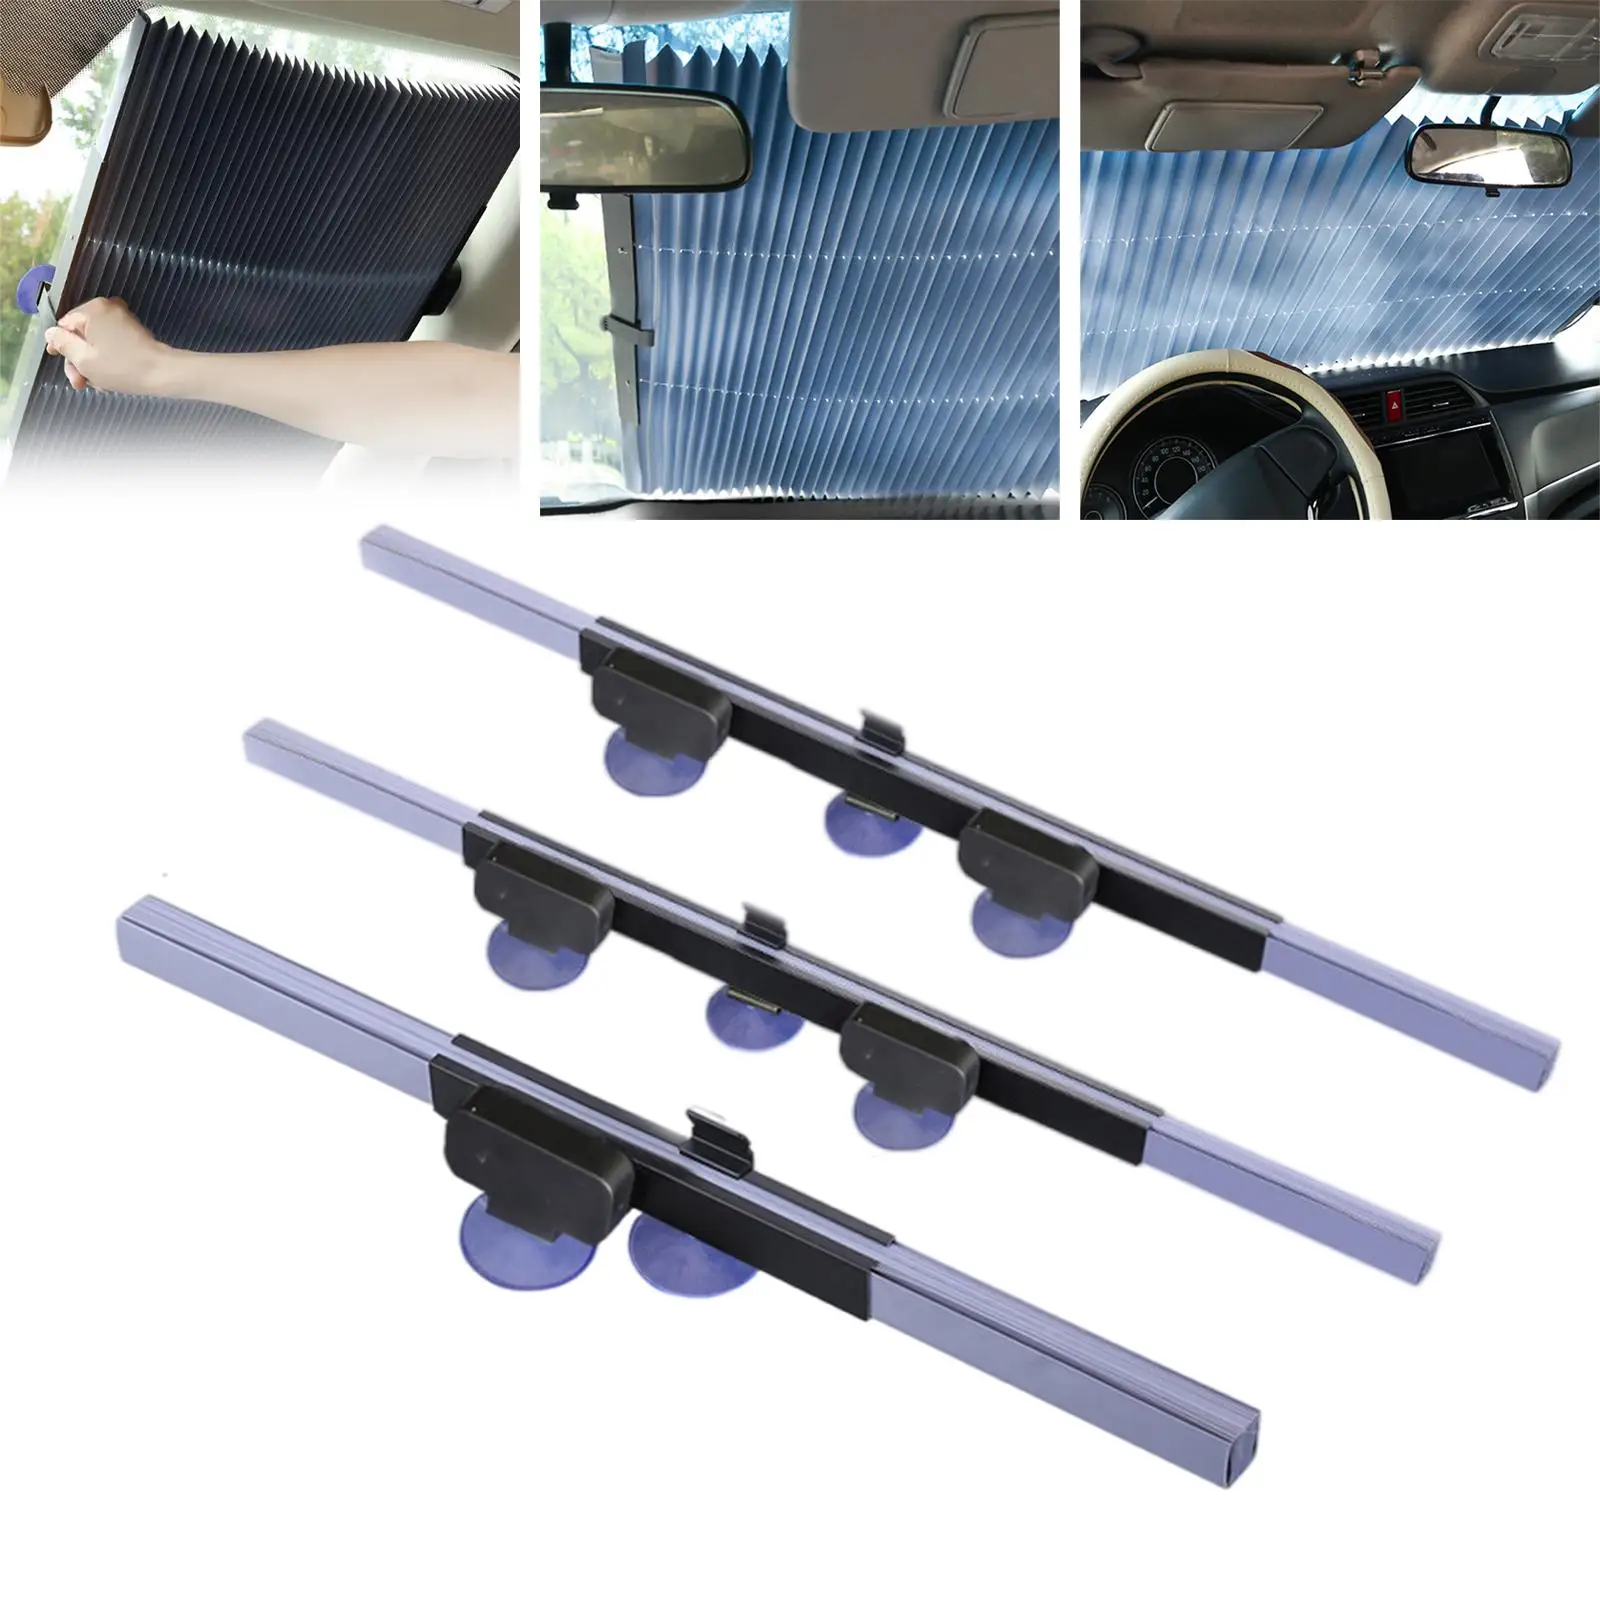 Retractable Windshield  Aluminum  Adjustable Car Styling Accessories Durable Suction Power  Curtains fit 